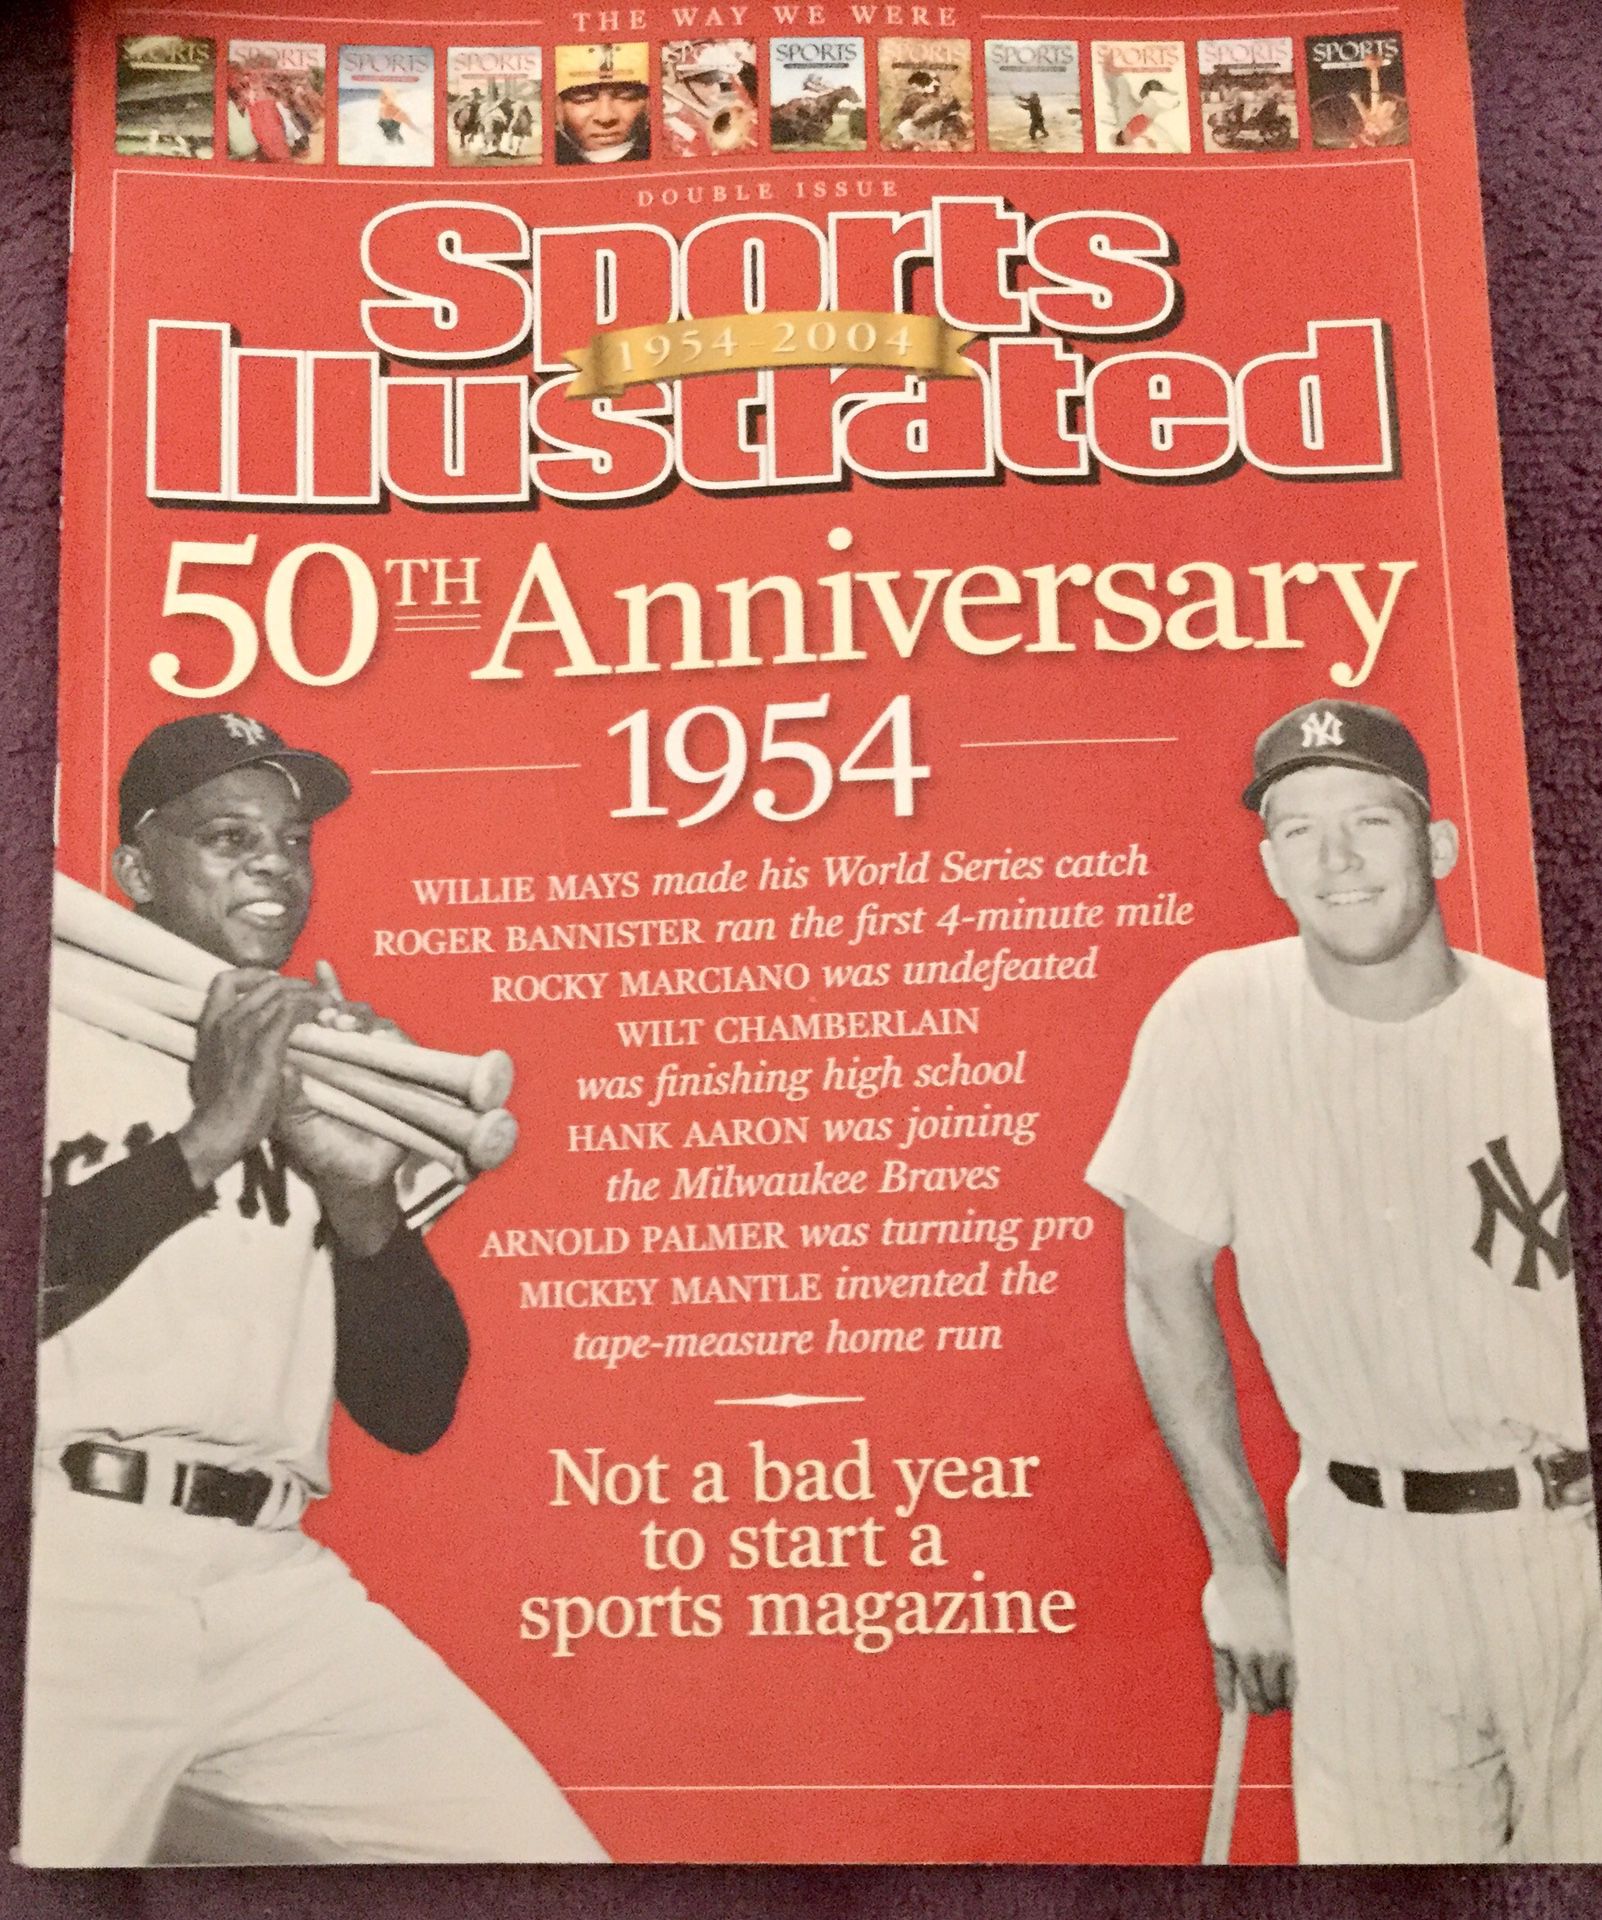 SPORTS-ILLUSTRATED-50th-ANNIVERSARY-DOUBLE-ISSUE-1(contact info removed)-MAYS-MANTLE